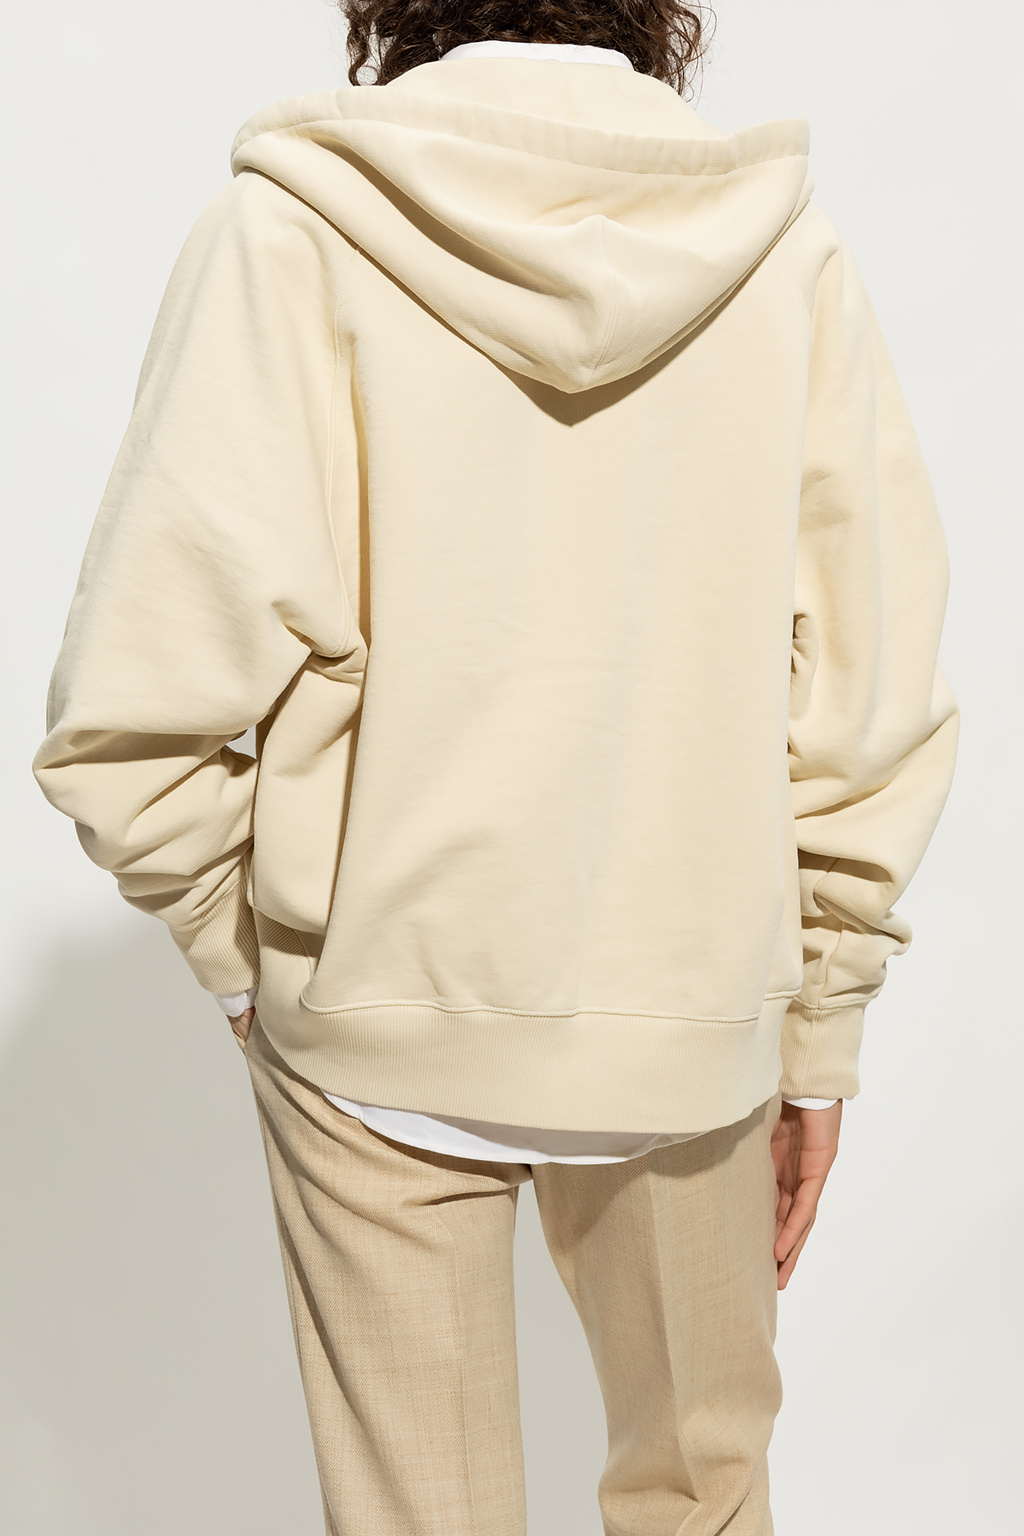 Ami Alexandre Mattiussi double-sleeve hoodie with logo